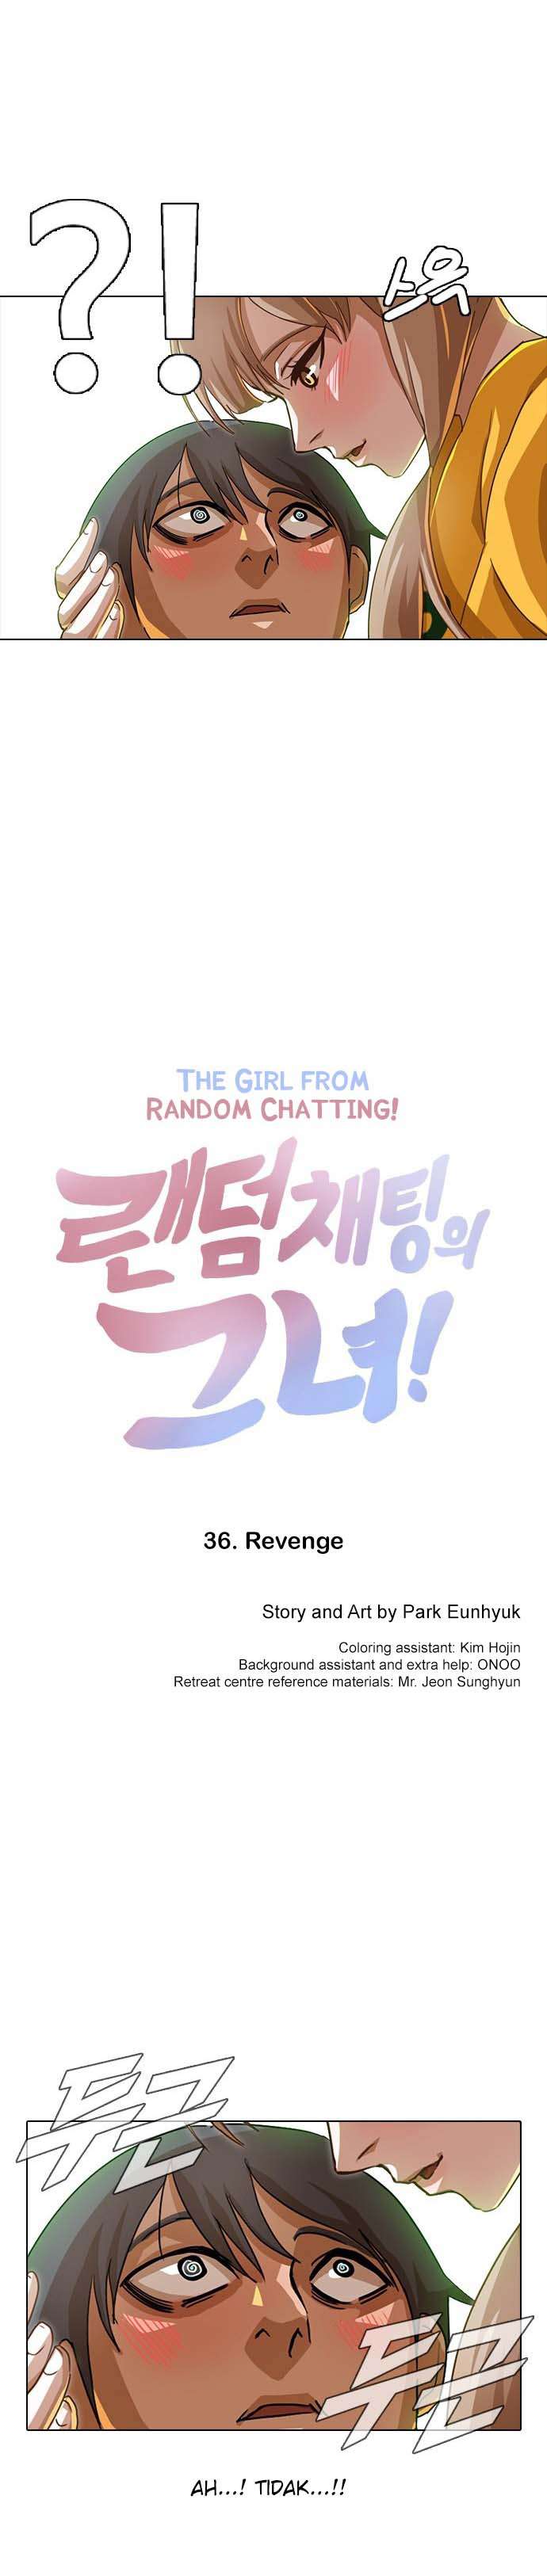 The Girl from Random Chatting! Chapter 36 1